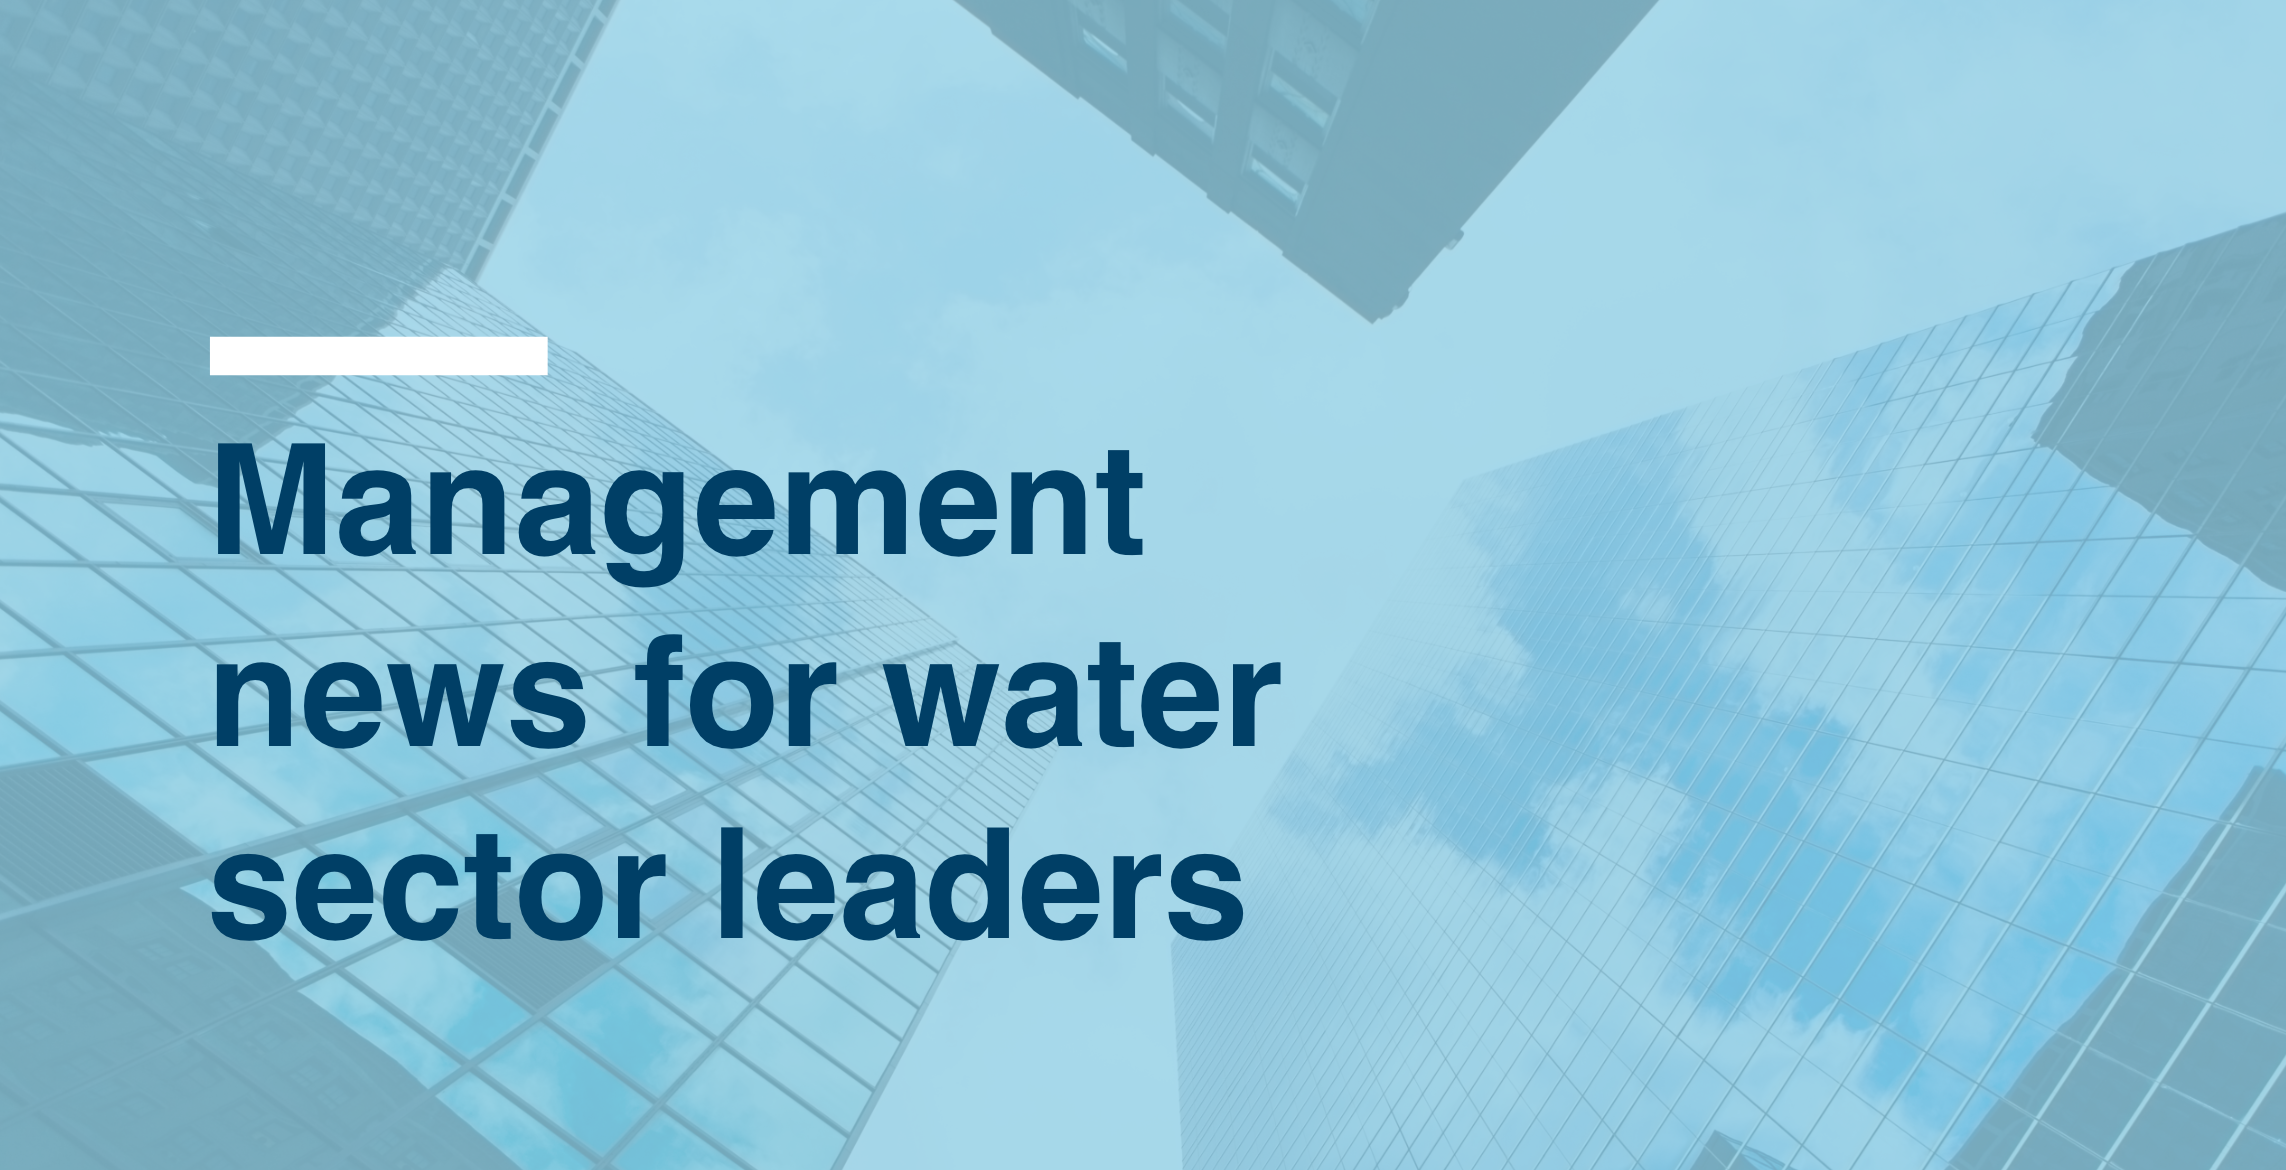 Management news for water sector leaders